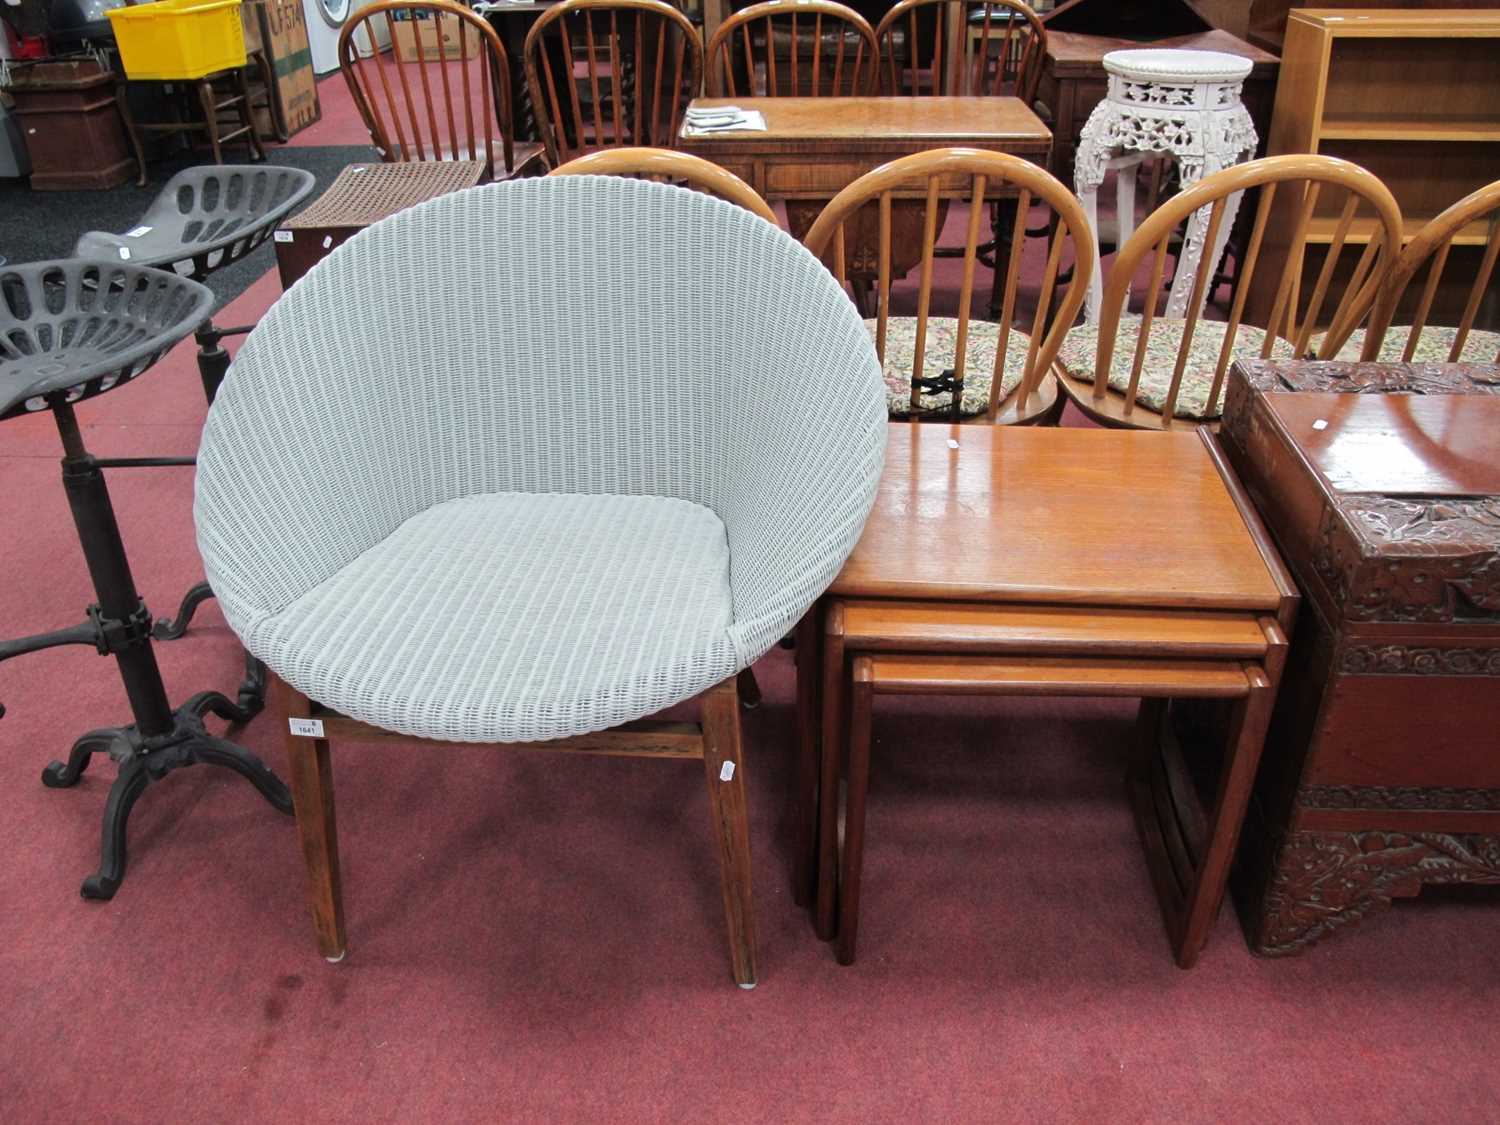 G-Plan Nest of Three 1970's Teak Coffee Tables, with barrel ends, Hudson basket work chair. (2).